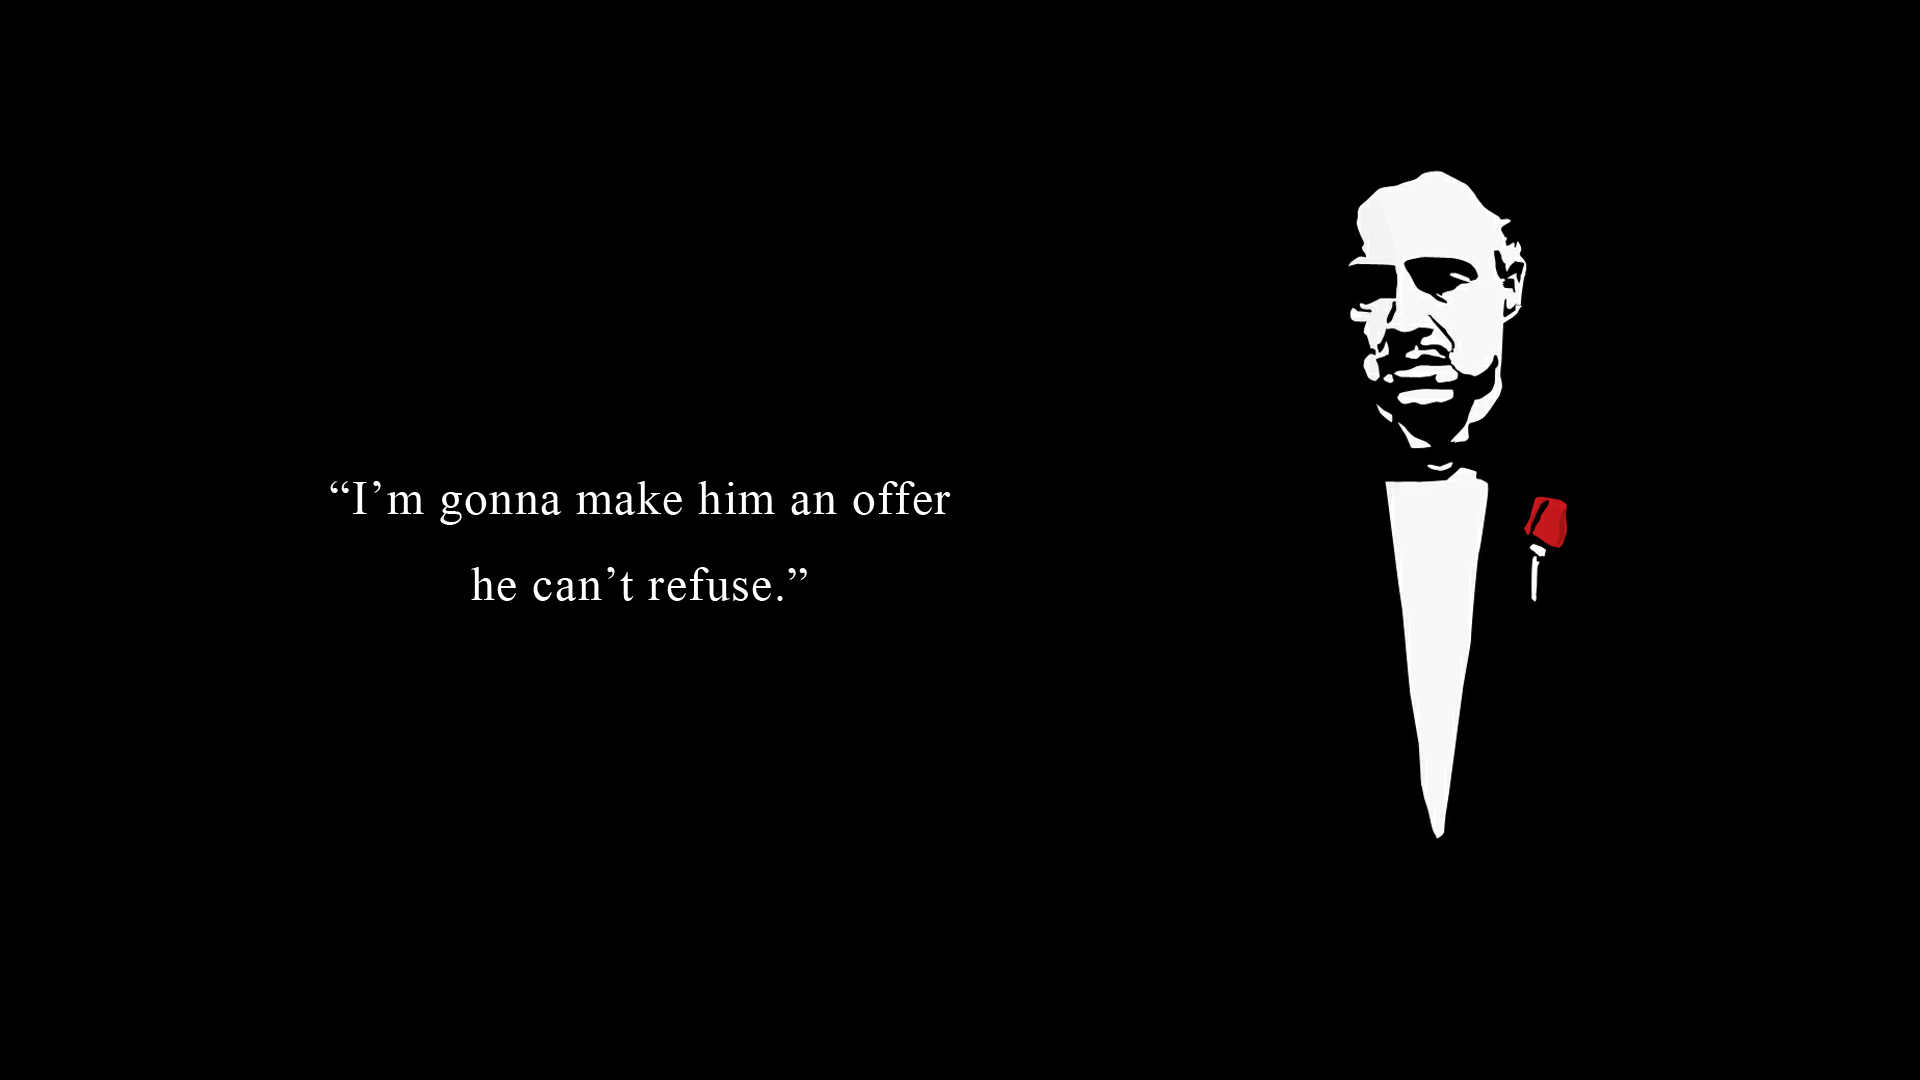 https://cdn.quotesgram.com/img/4/27/1643258045-movie-quotes-godfather.png